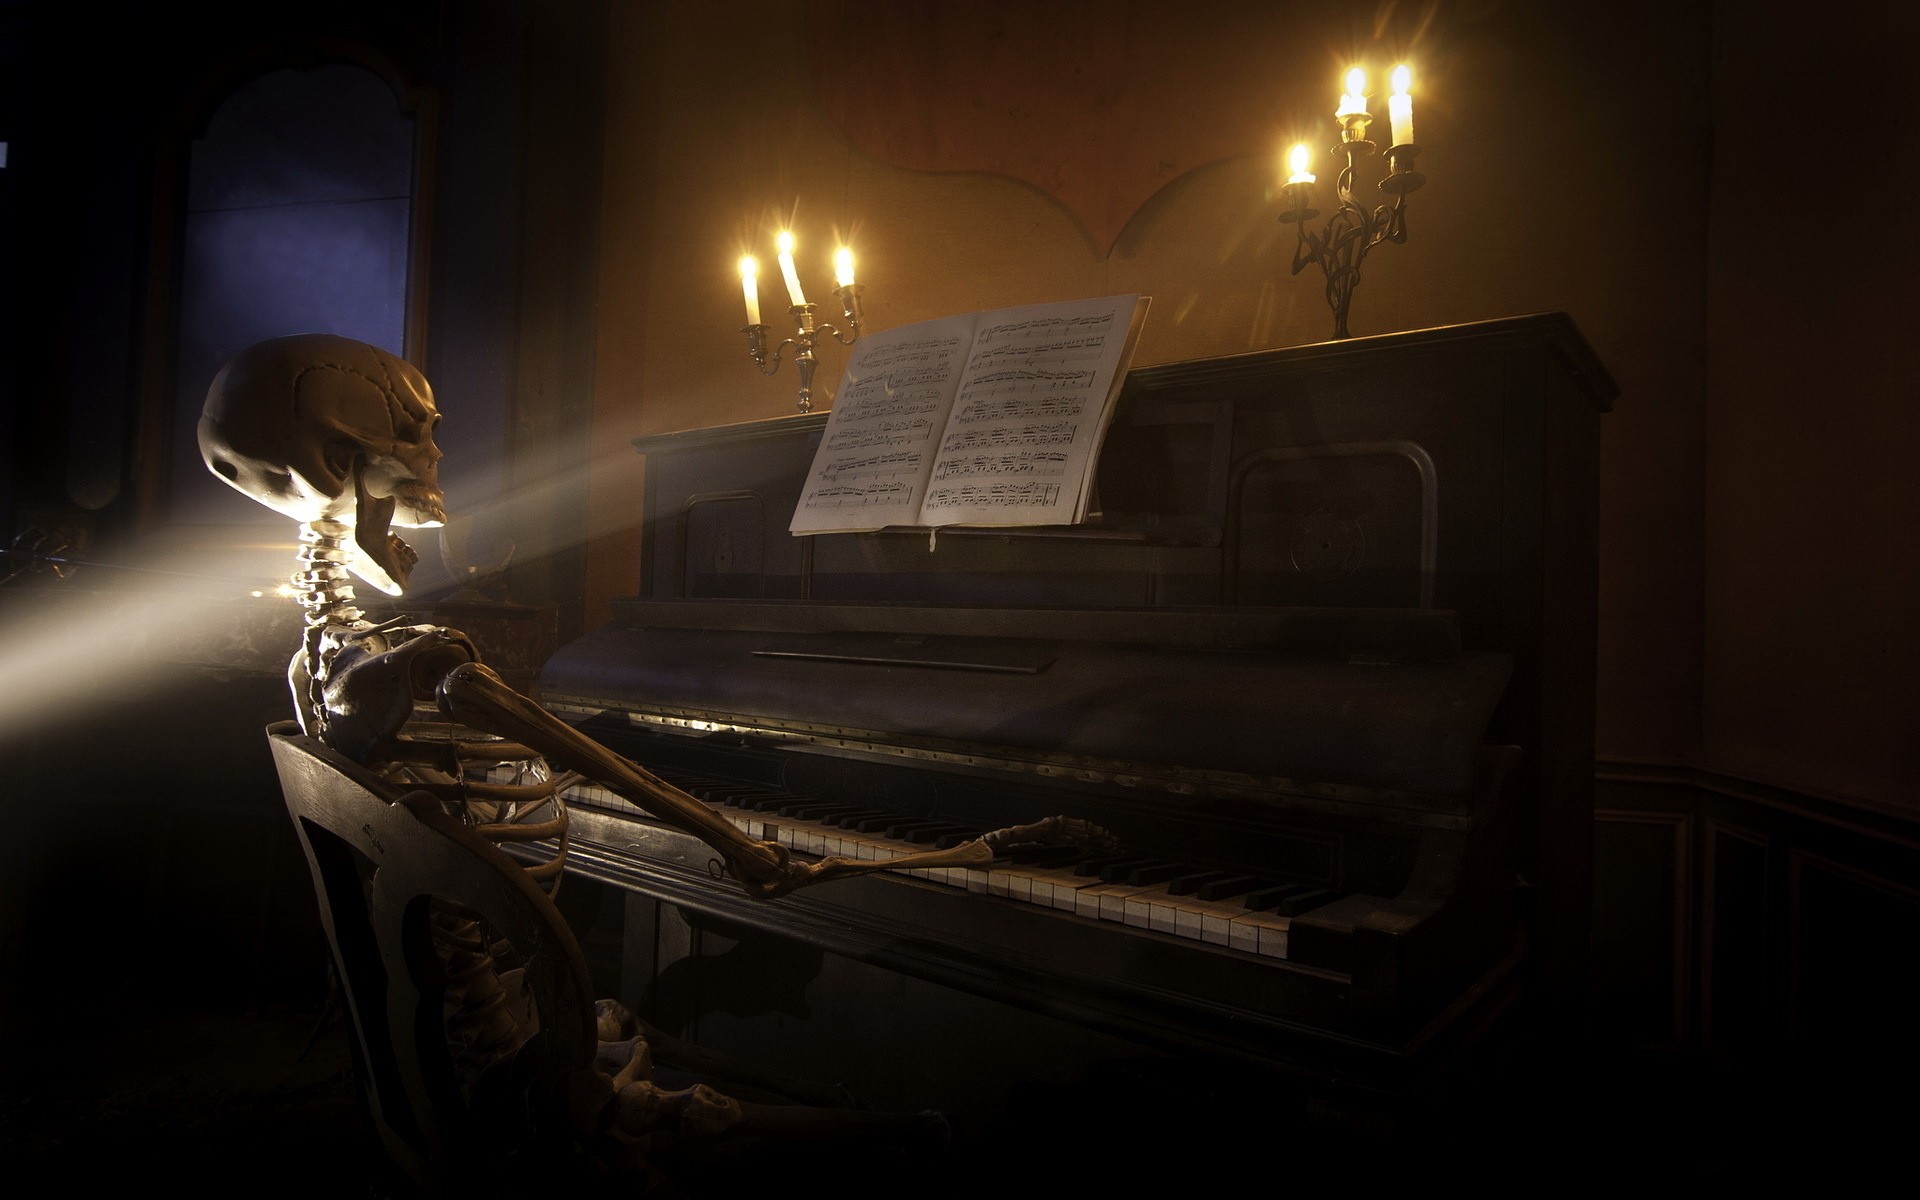 digital art, Skull, Skeleton, Death, Open mouth, Piano, Playing, Sun rays, 3D, Candles, Chair, Sitting Wallpaper